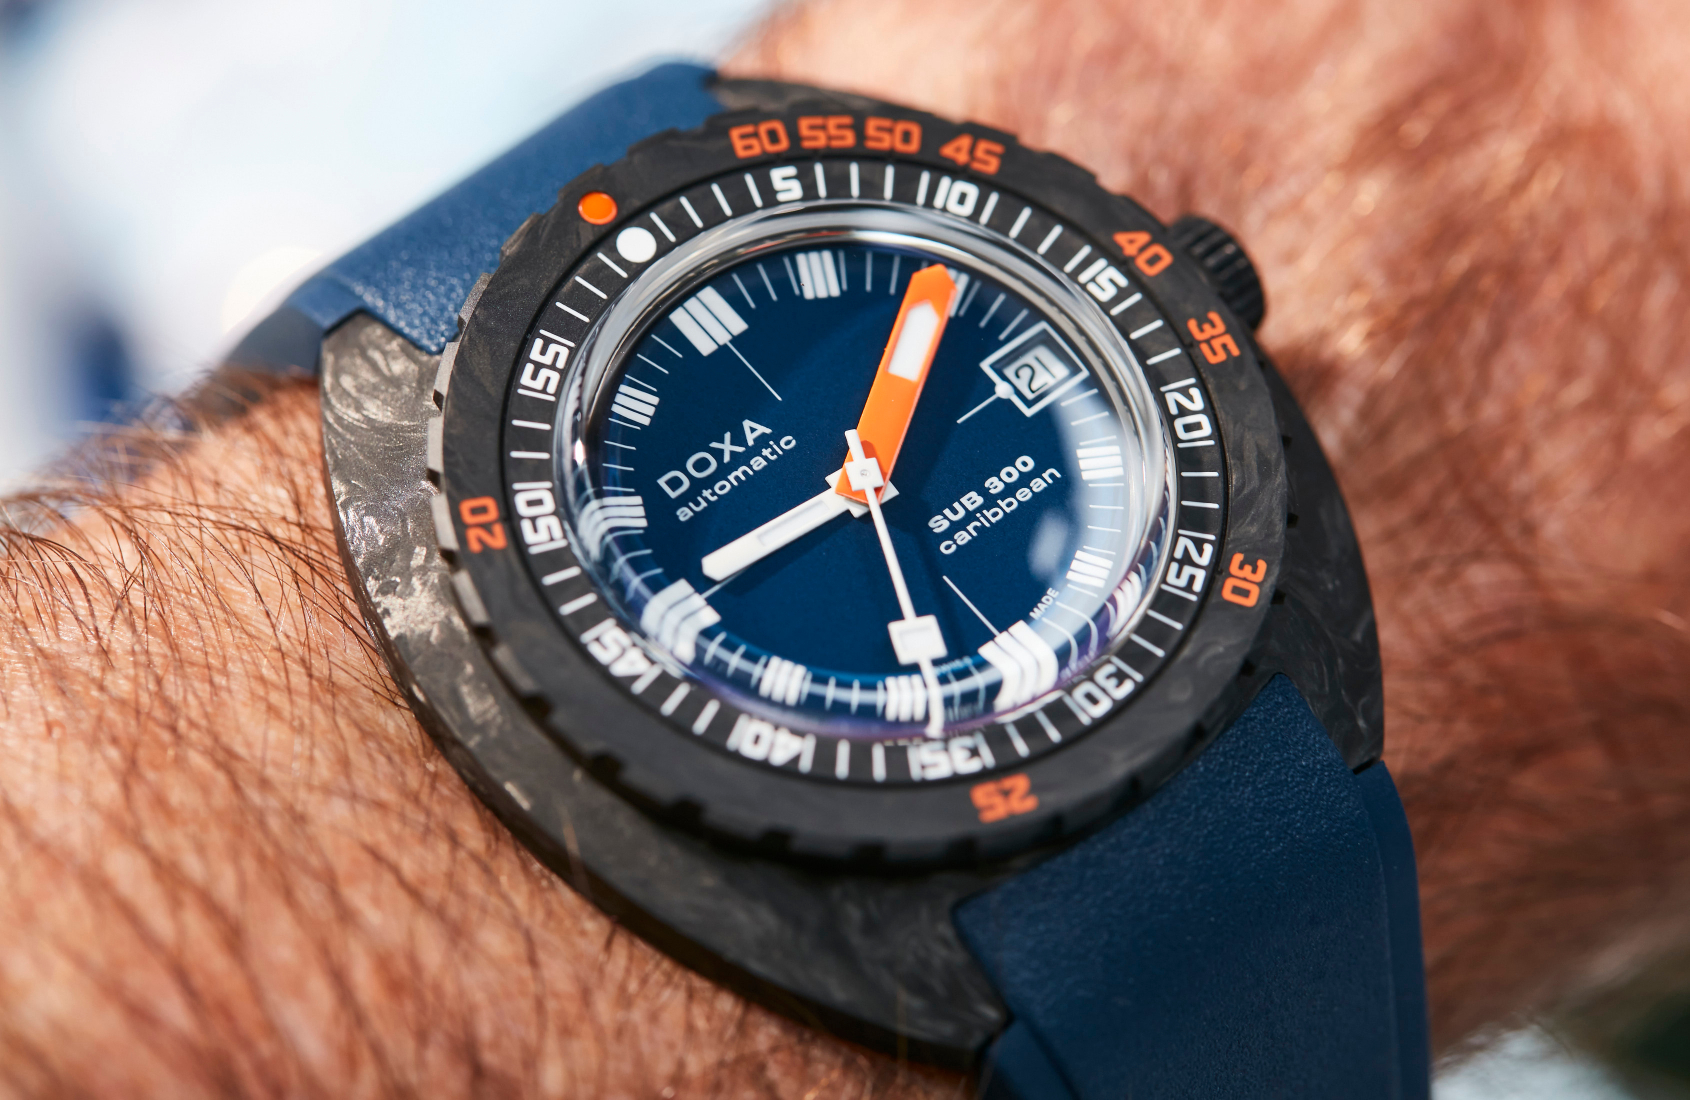 DOXA Sub 300 Carbon range delivers 6 eye-popping dials